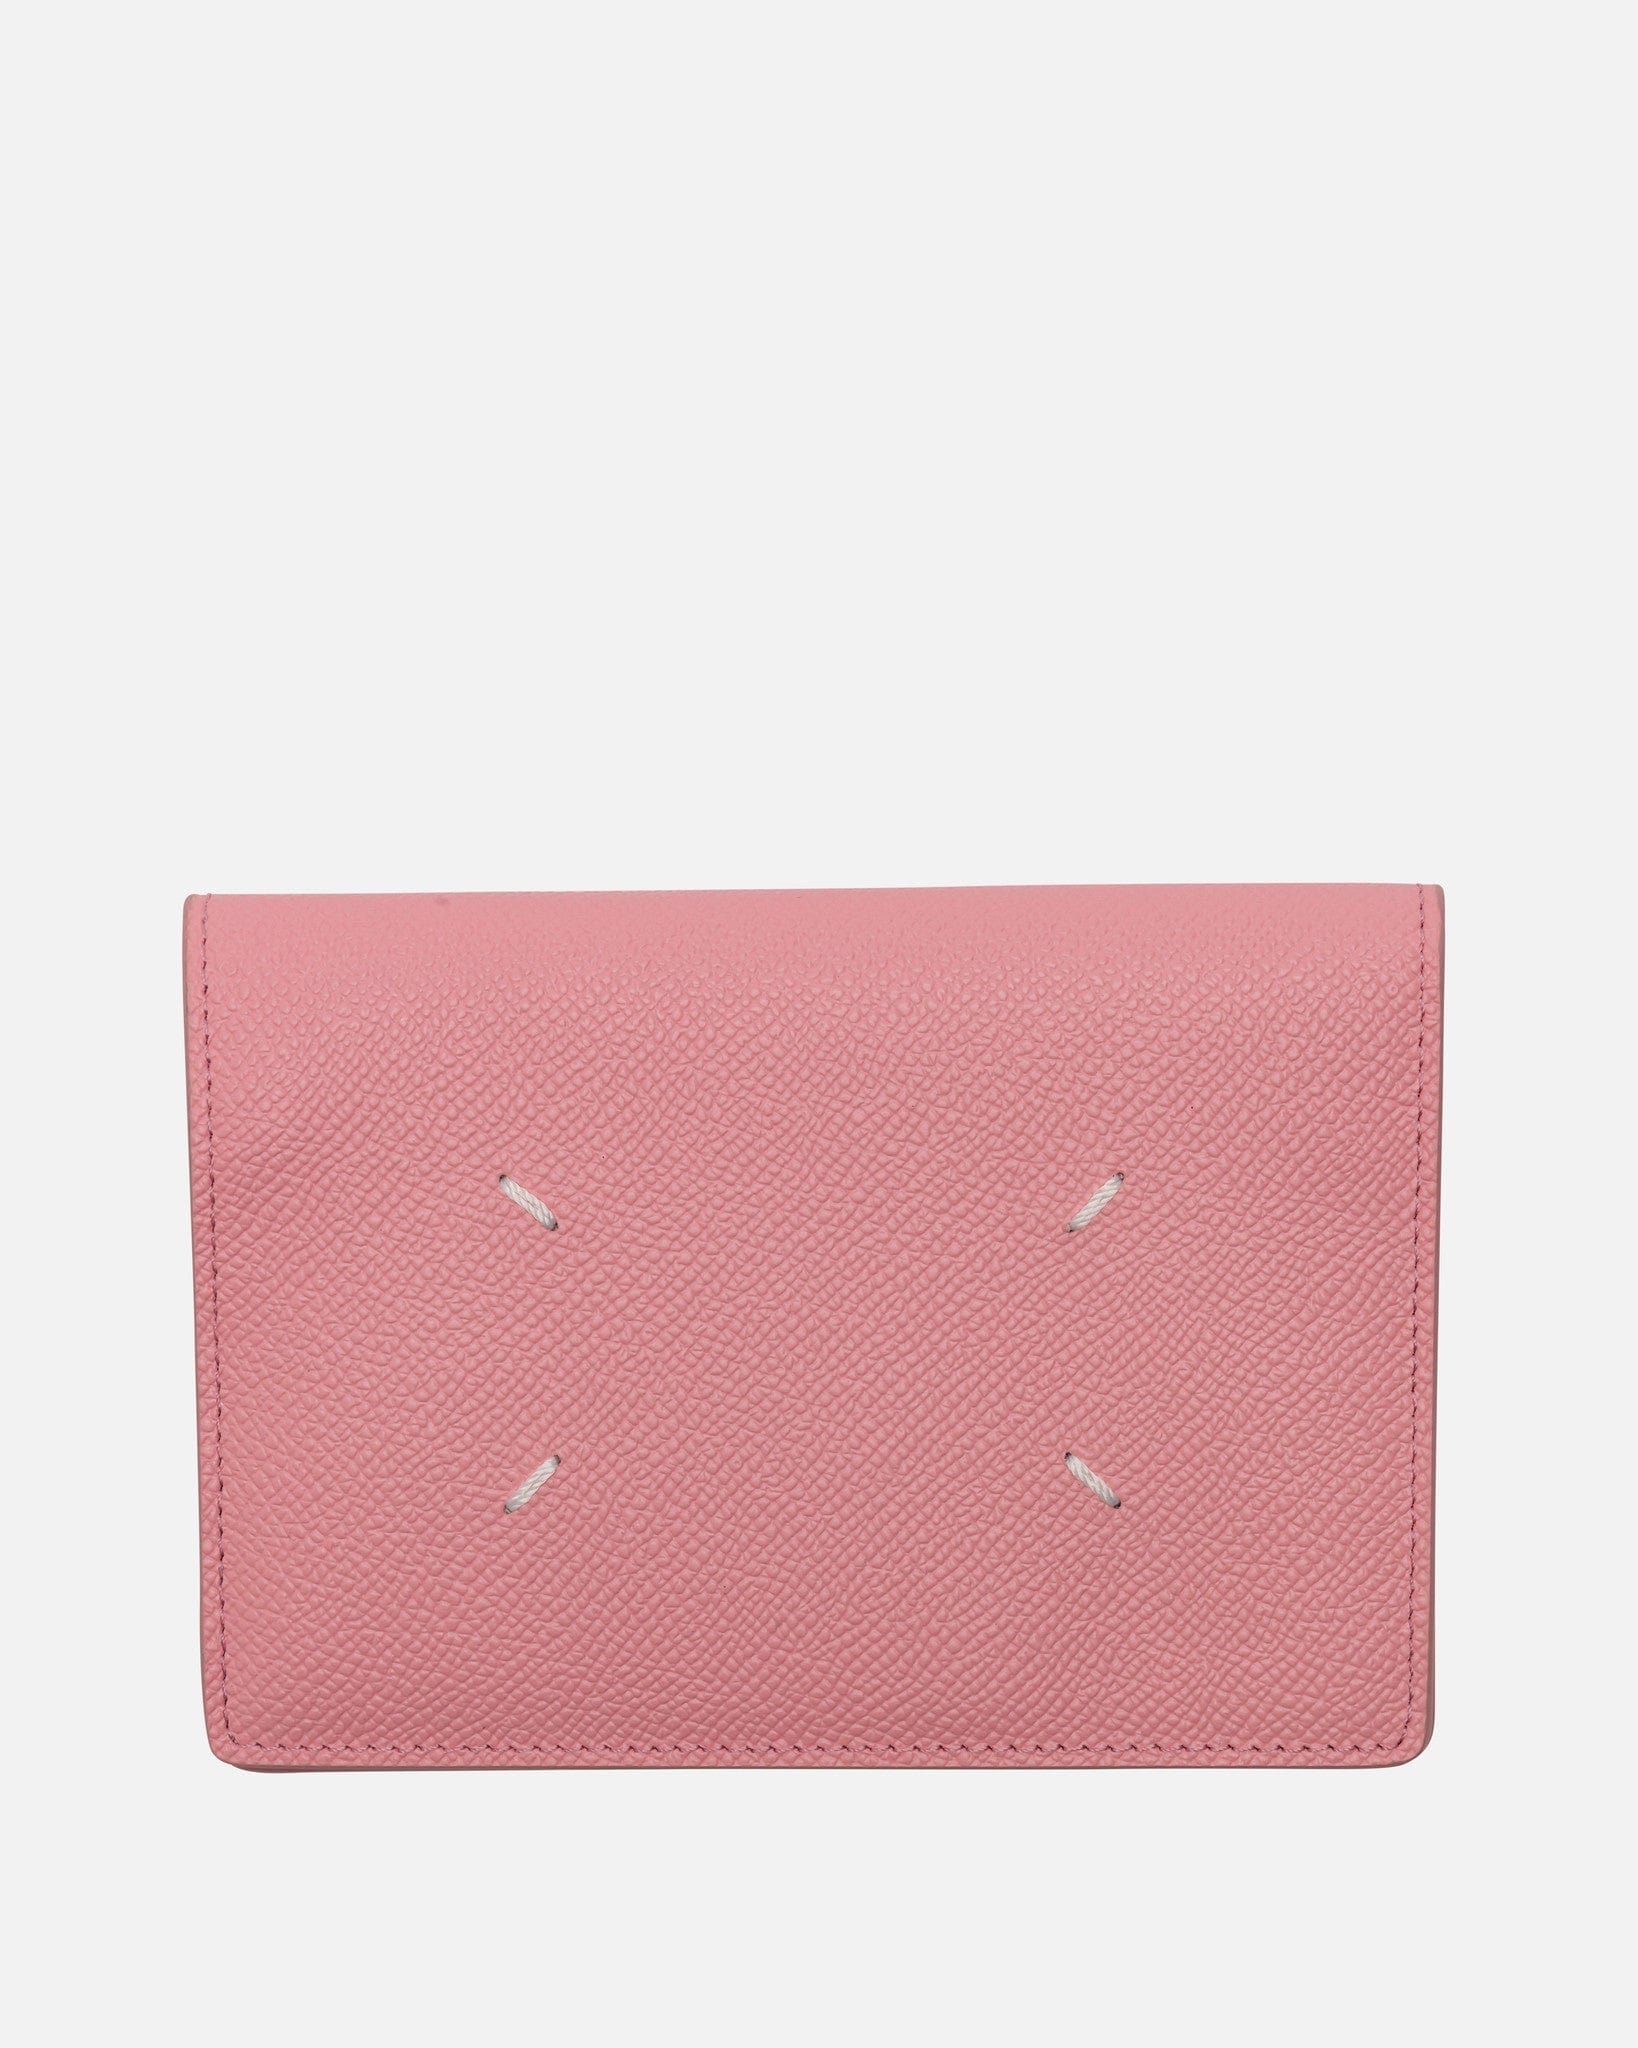 Maison Margiela Leather Goods O/S Passport Cover in Peony